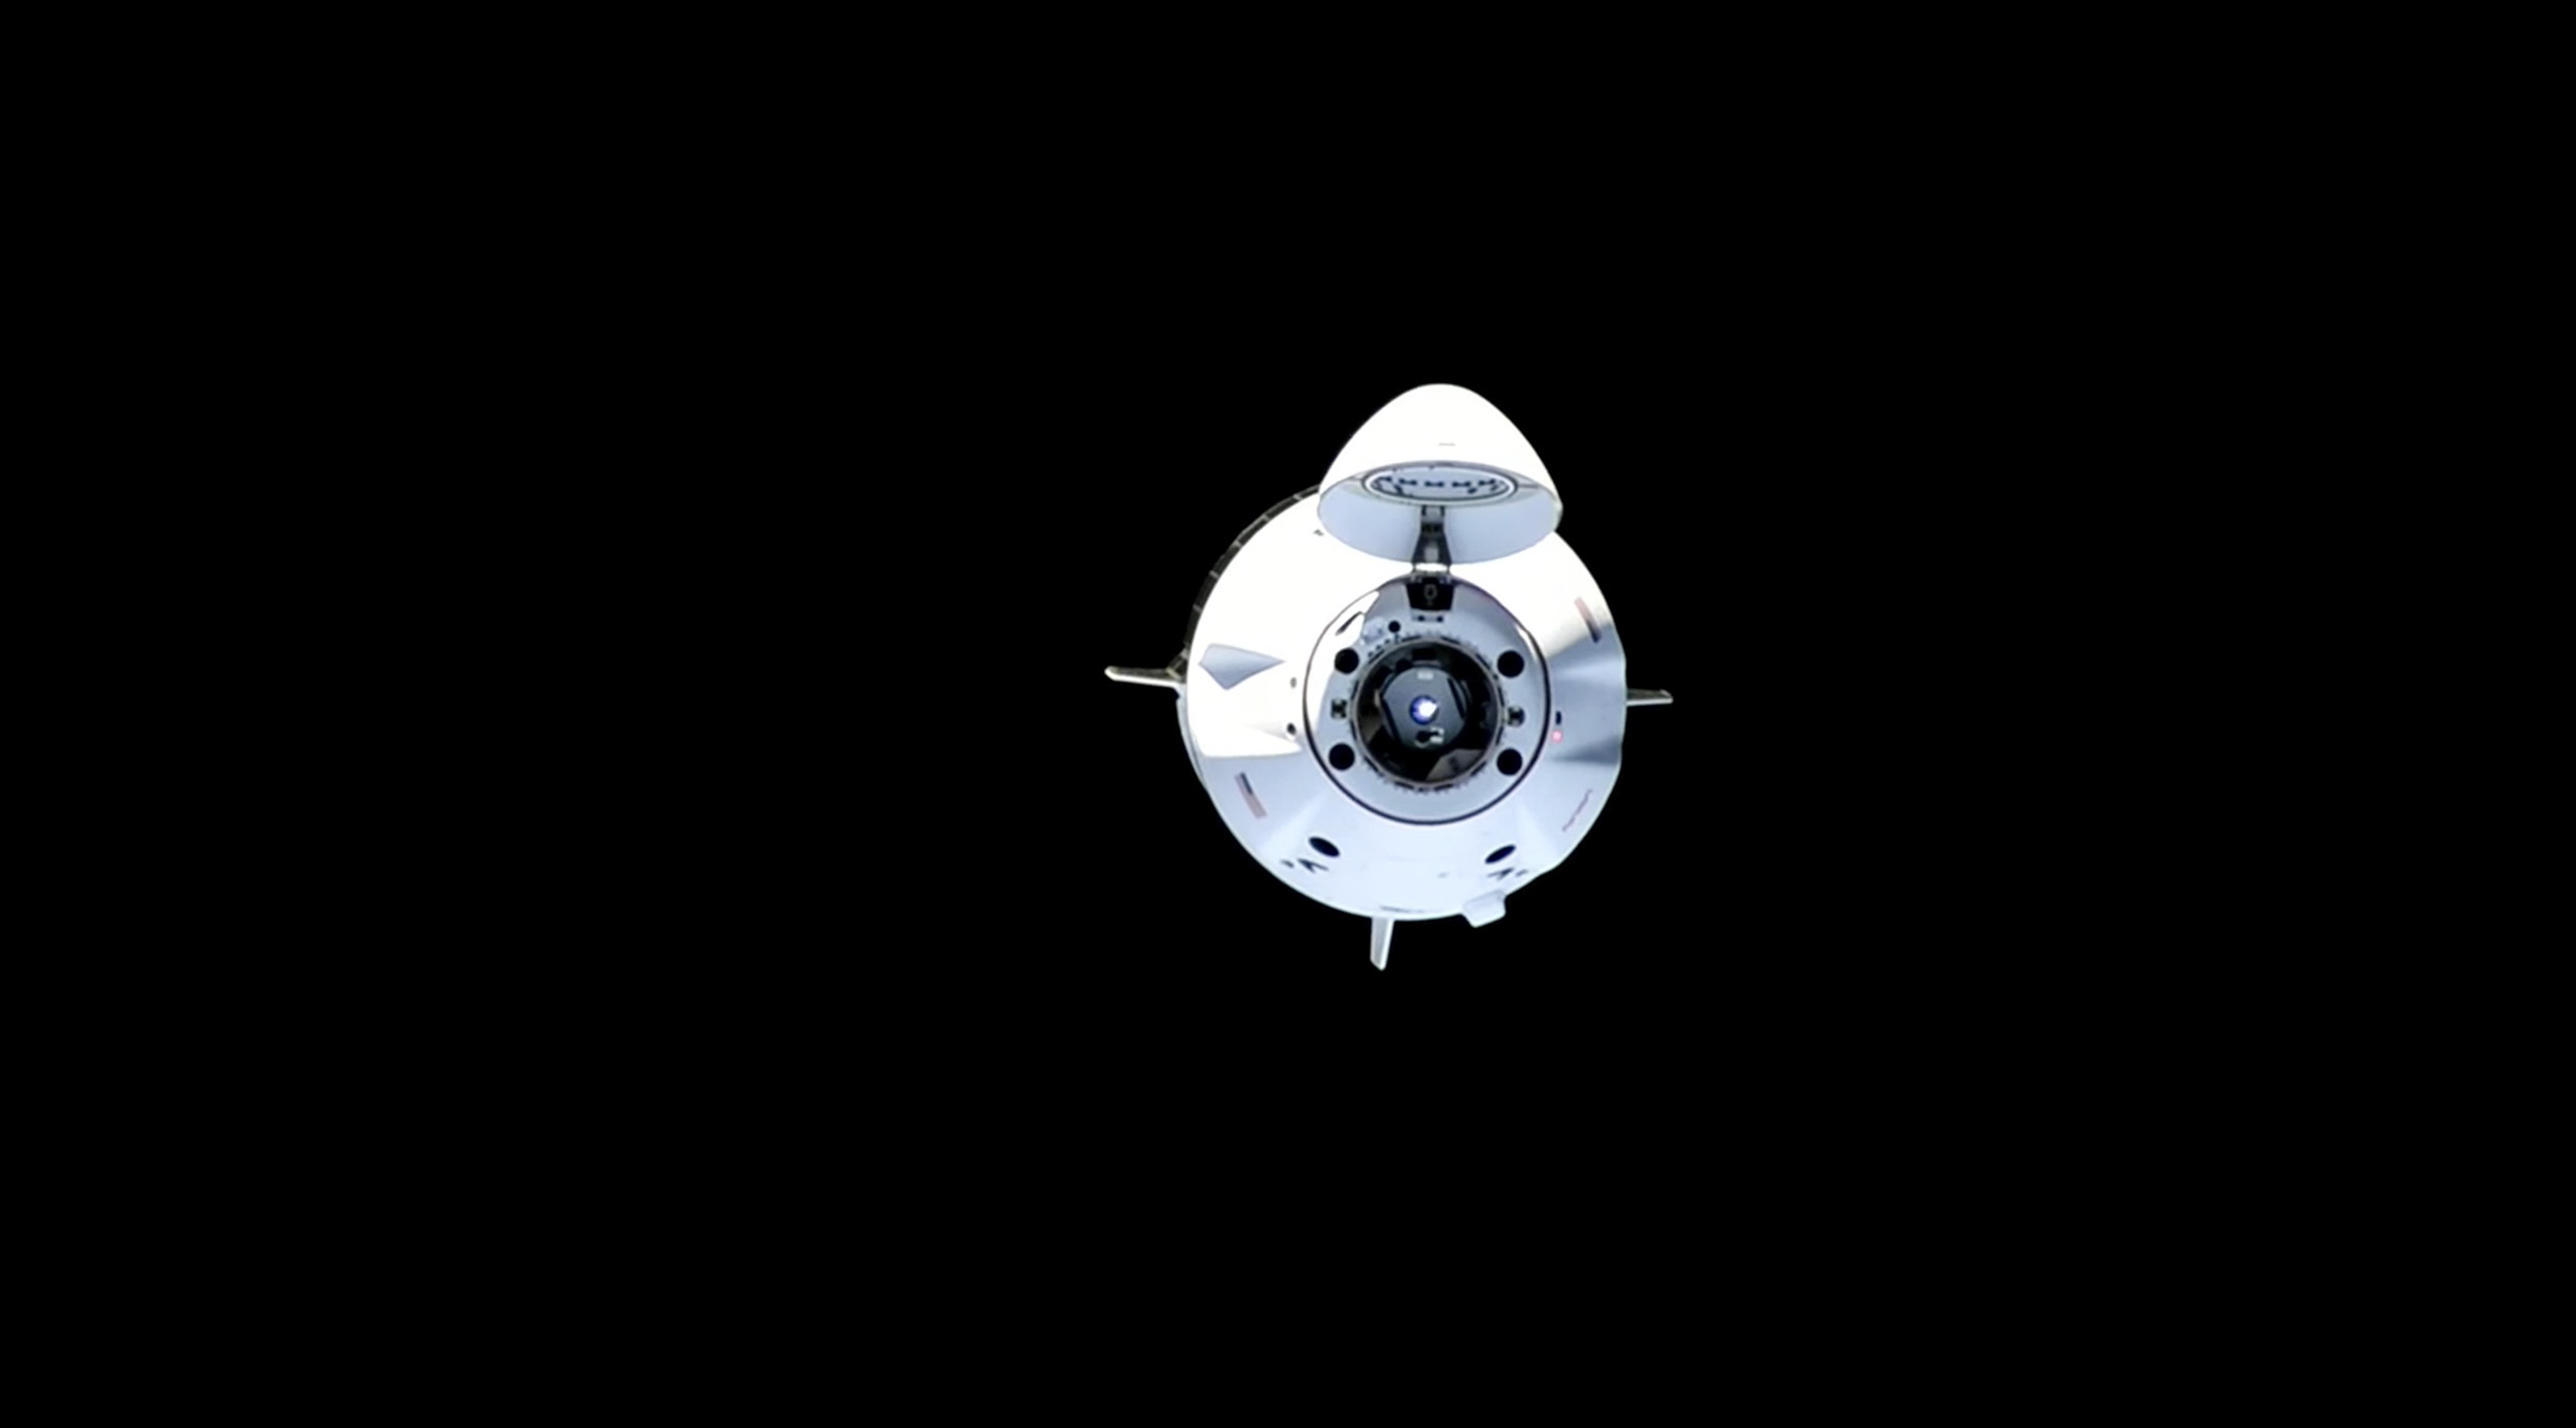 crew dragon in the middle distance during docking with international space station with black space behind